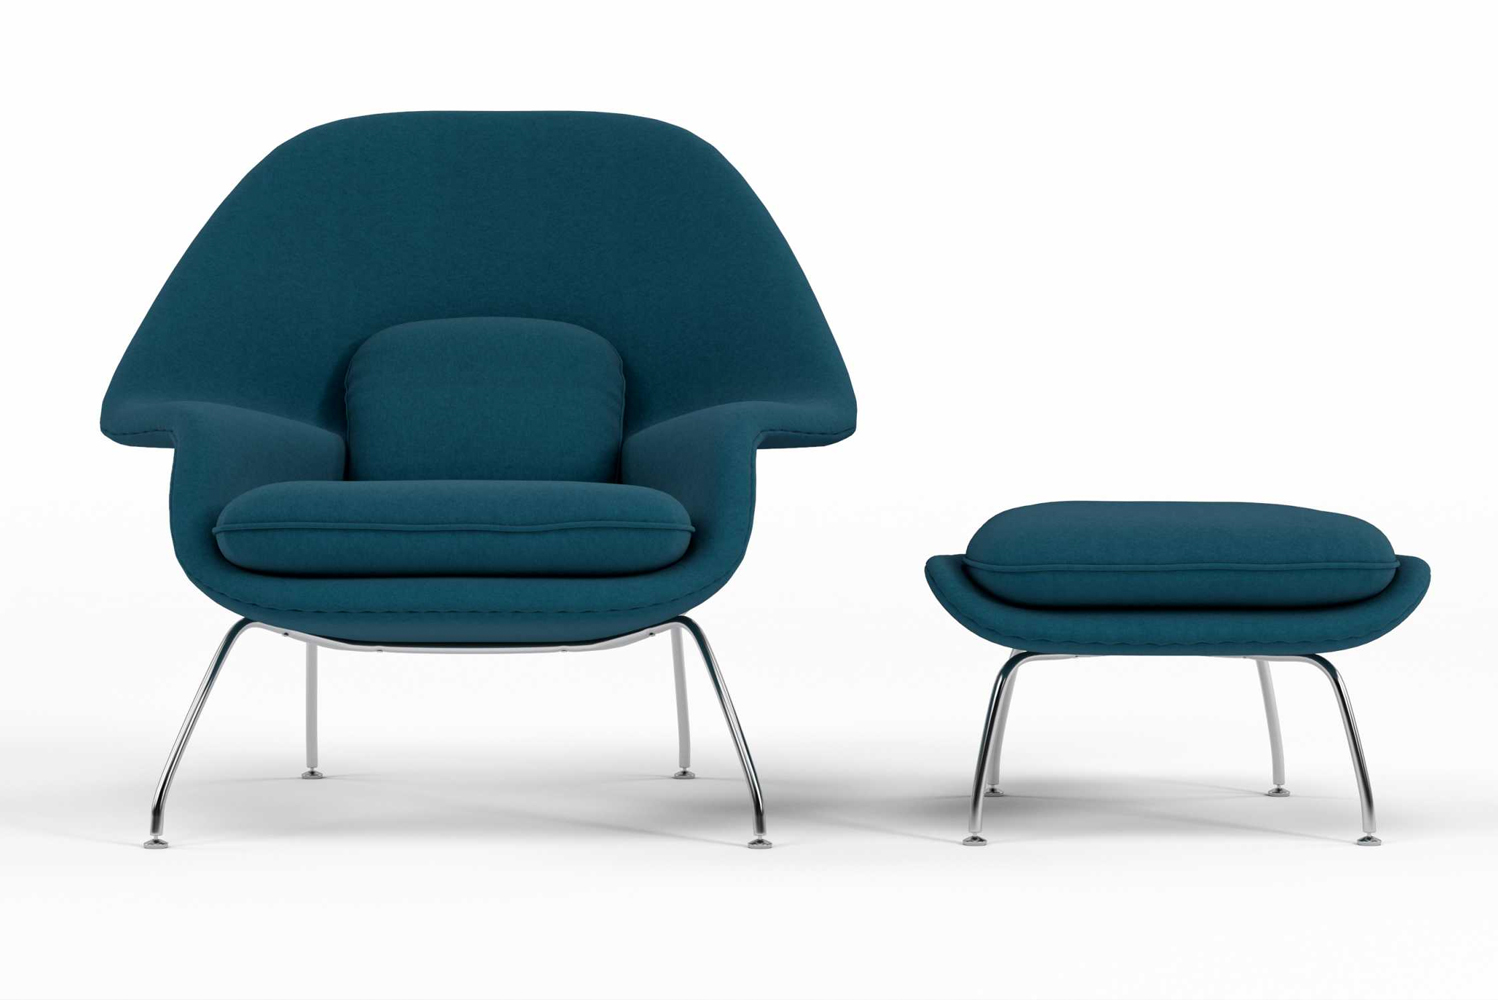 Introducing the Womb chair and ottoman created after Florence Knoll requested Eero Saarinen to design a chair that was like